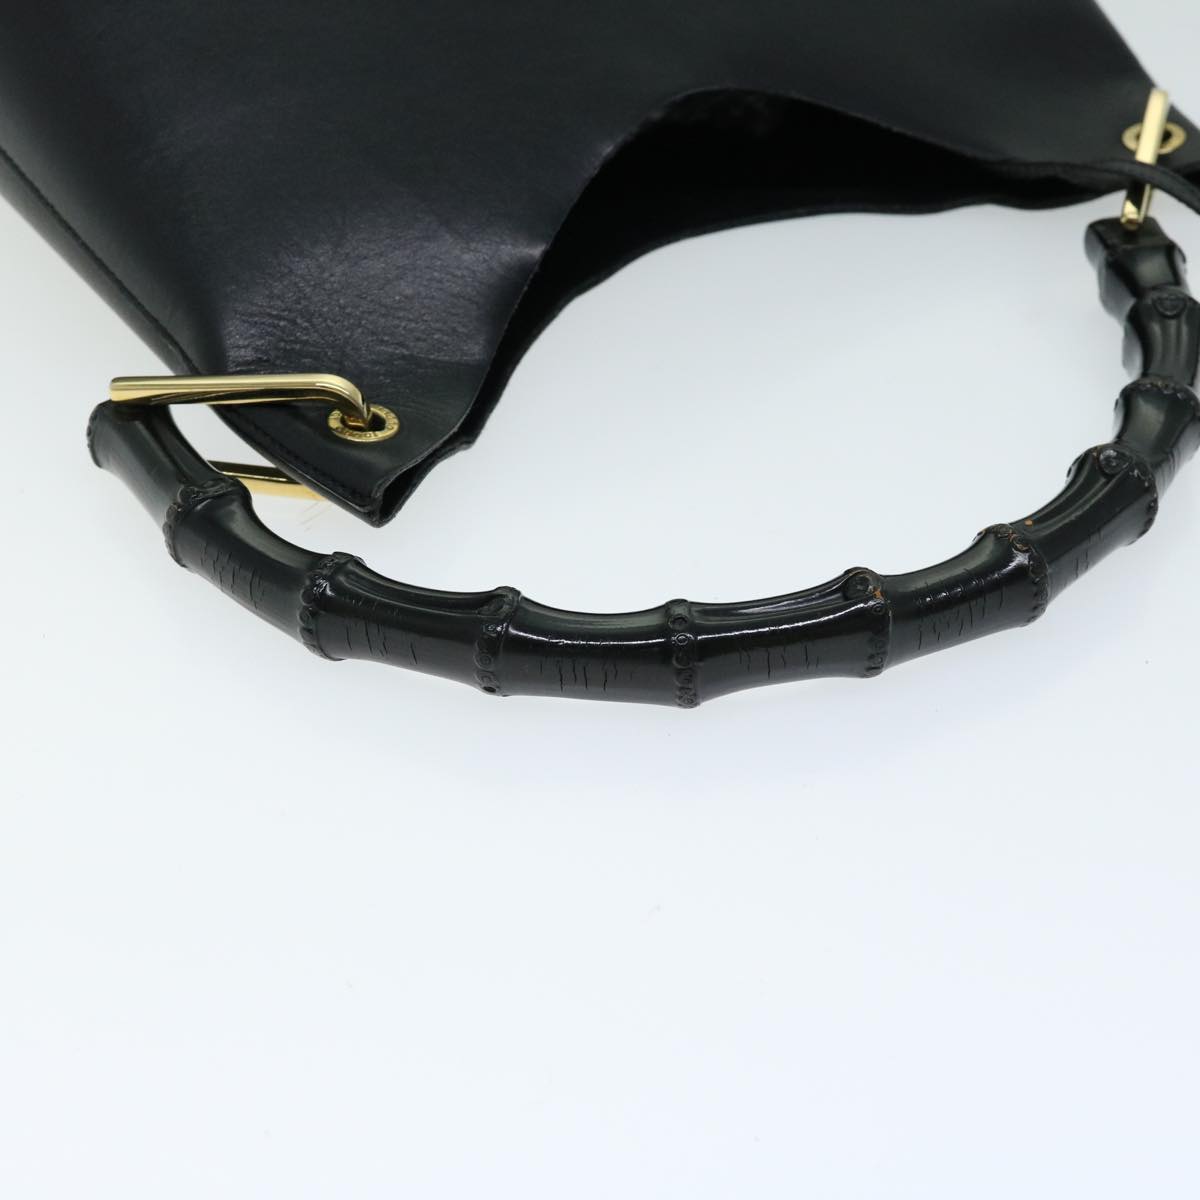 GUCCI Bamboo Shoulder Bag Leather Black Auth 66490